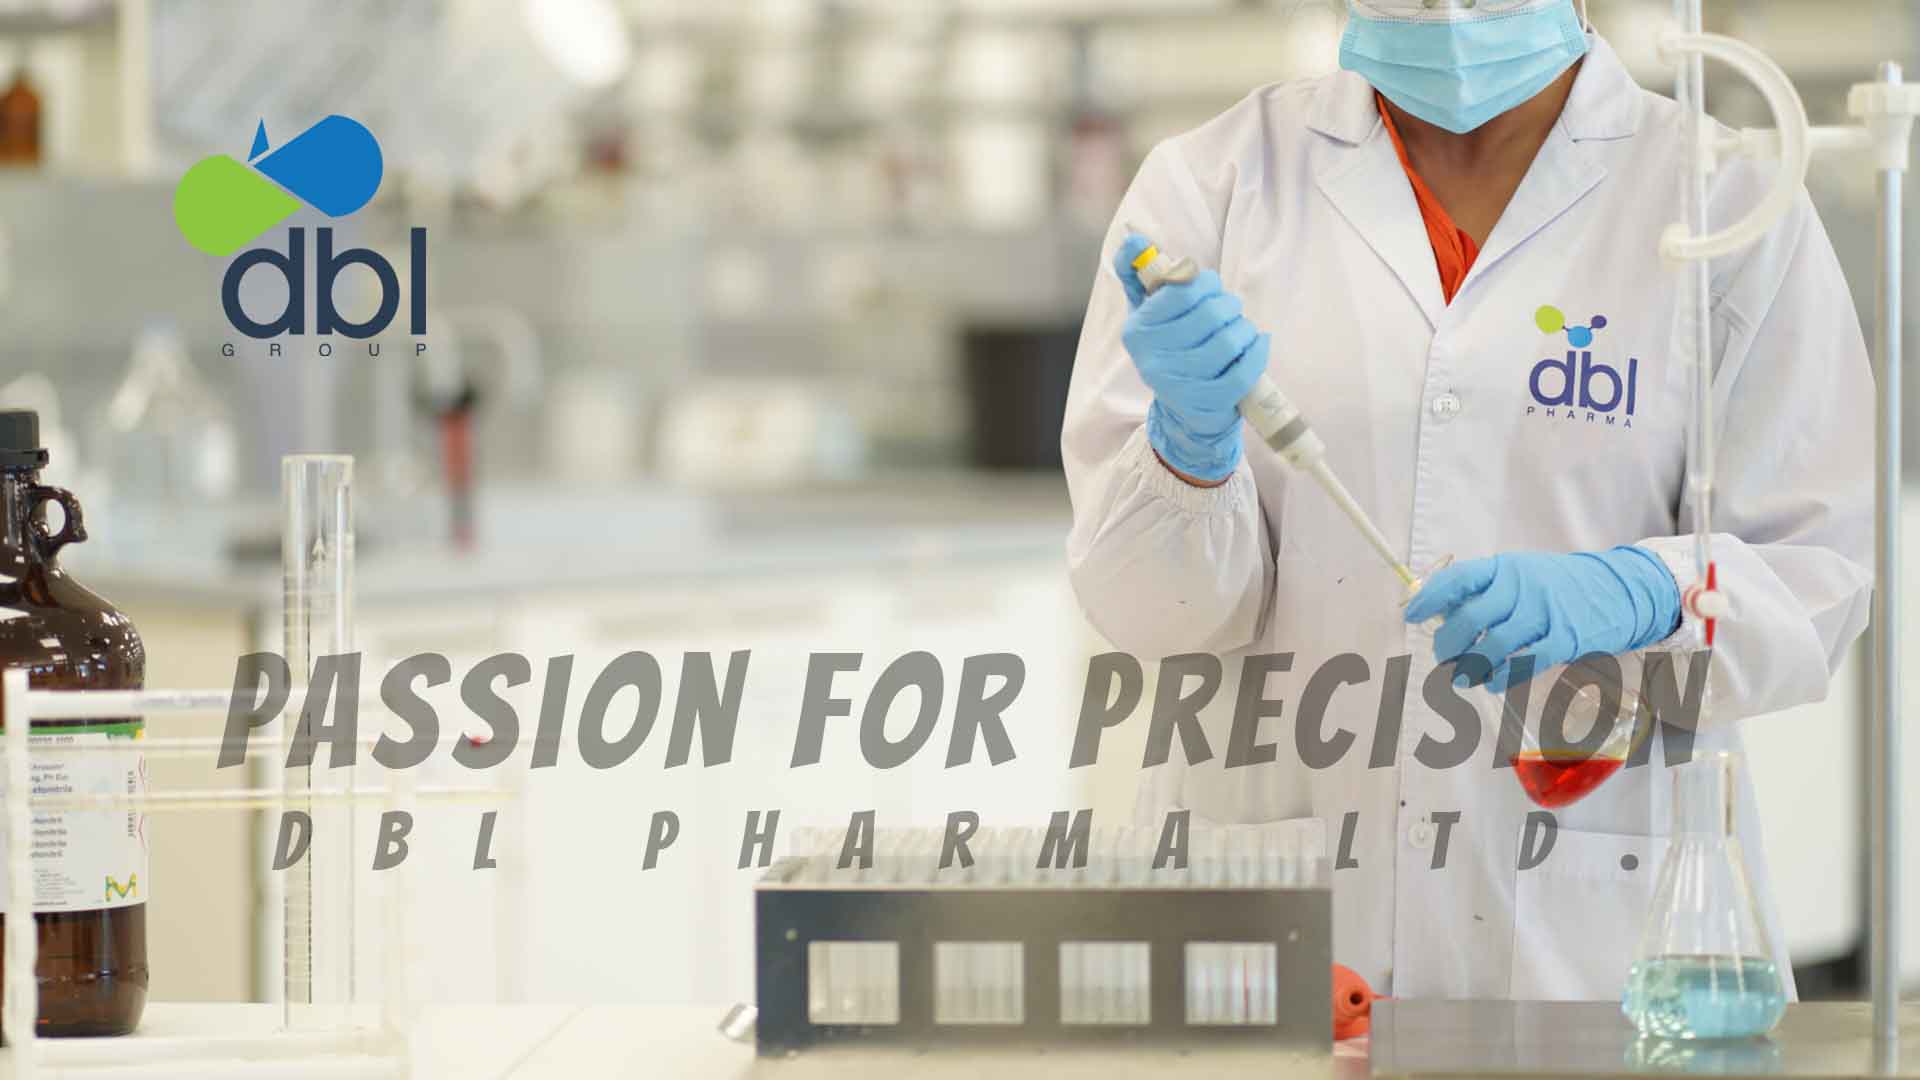 Thumbnail image illustrating DBL Pharma's unwavering commitment to precision and excellence in pharmaceuticals.